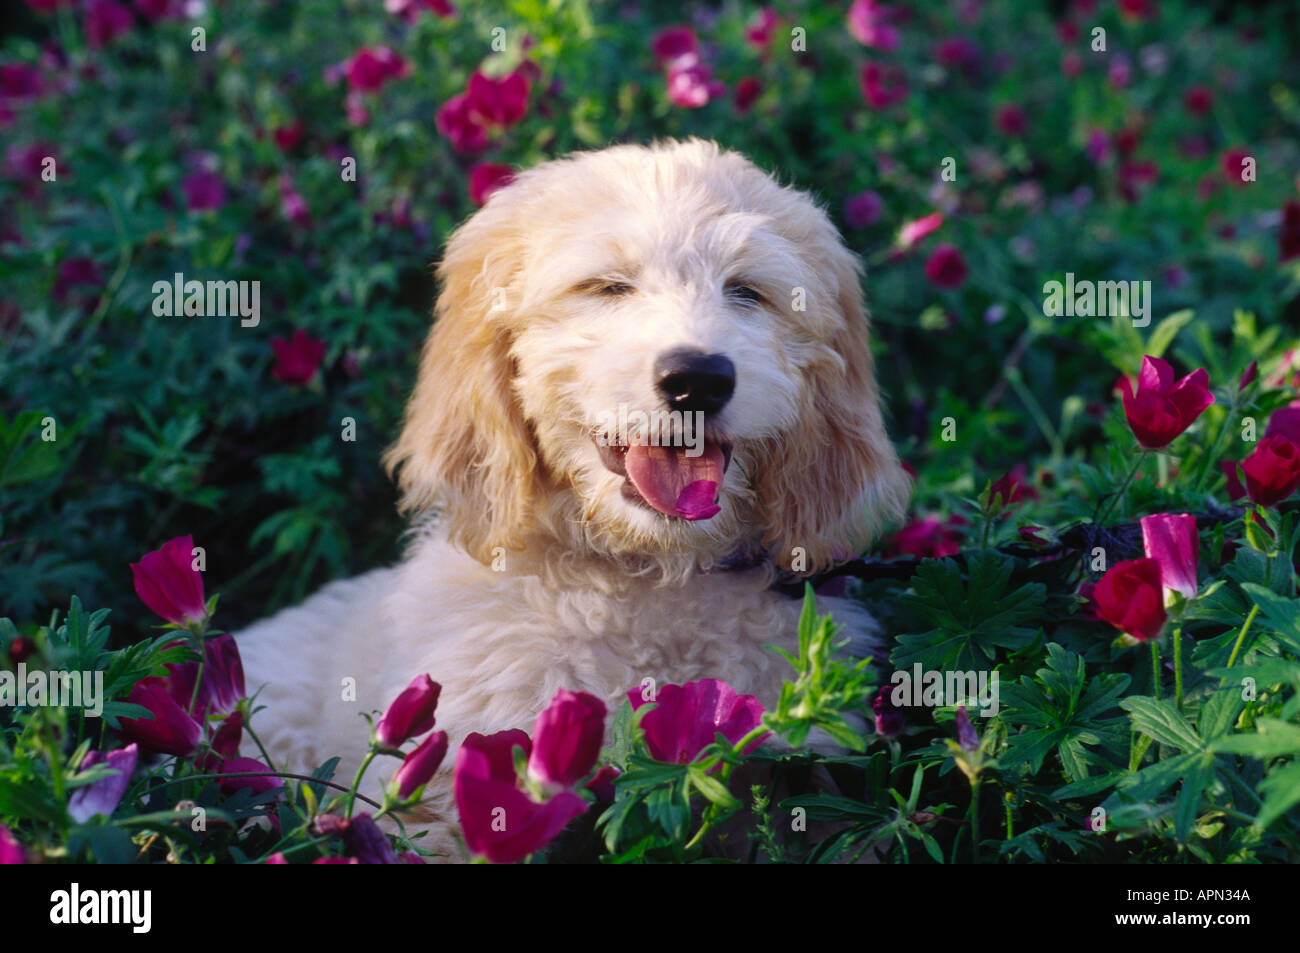 golden doodle puppy mixed breed dog eating flowers Stock Photo